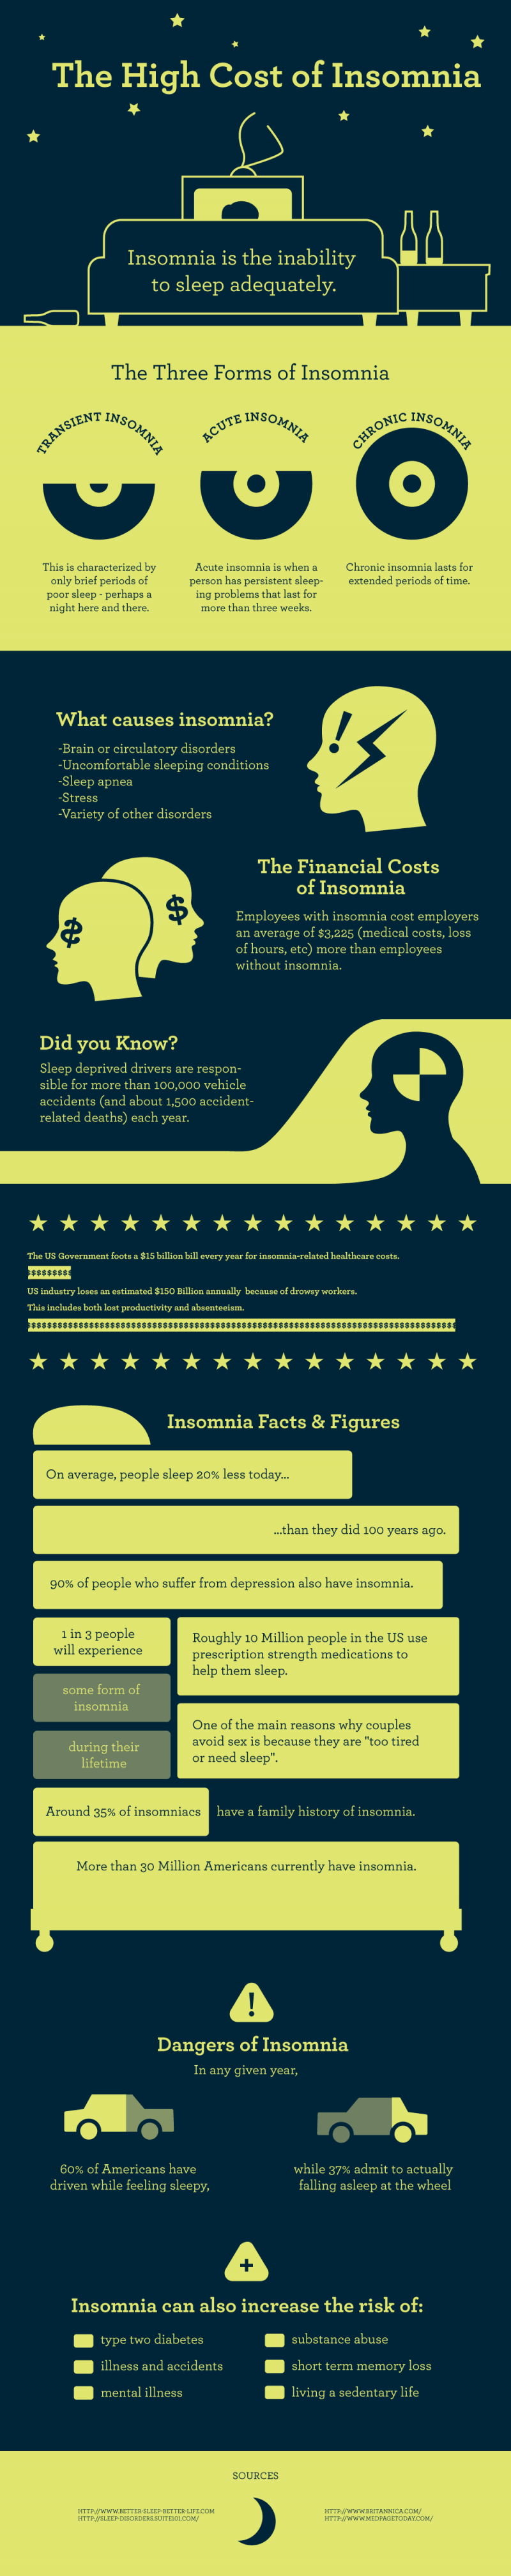 The High Cost of Insomnia in the United States [Infographic]